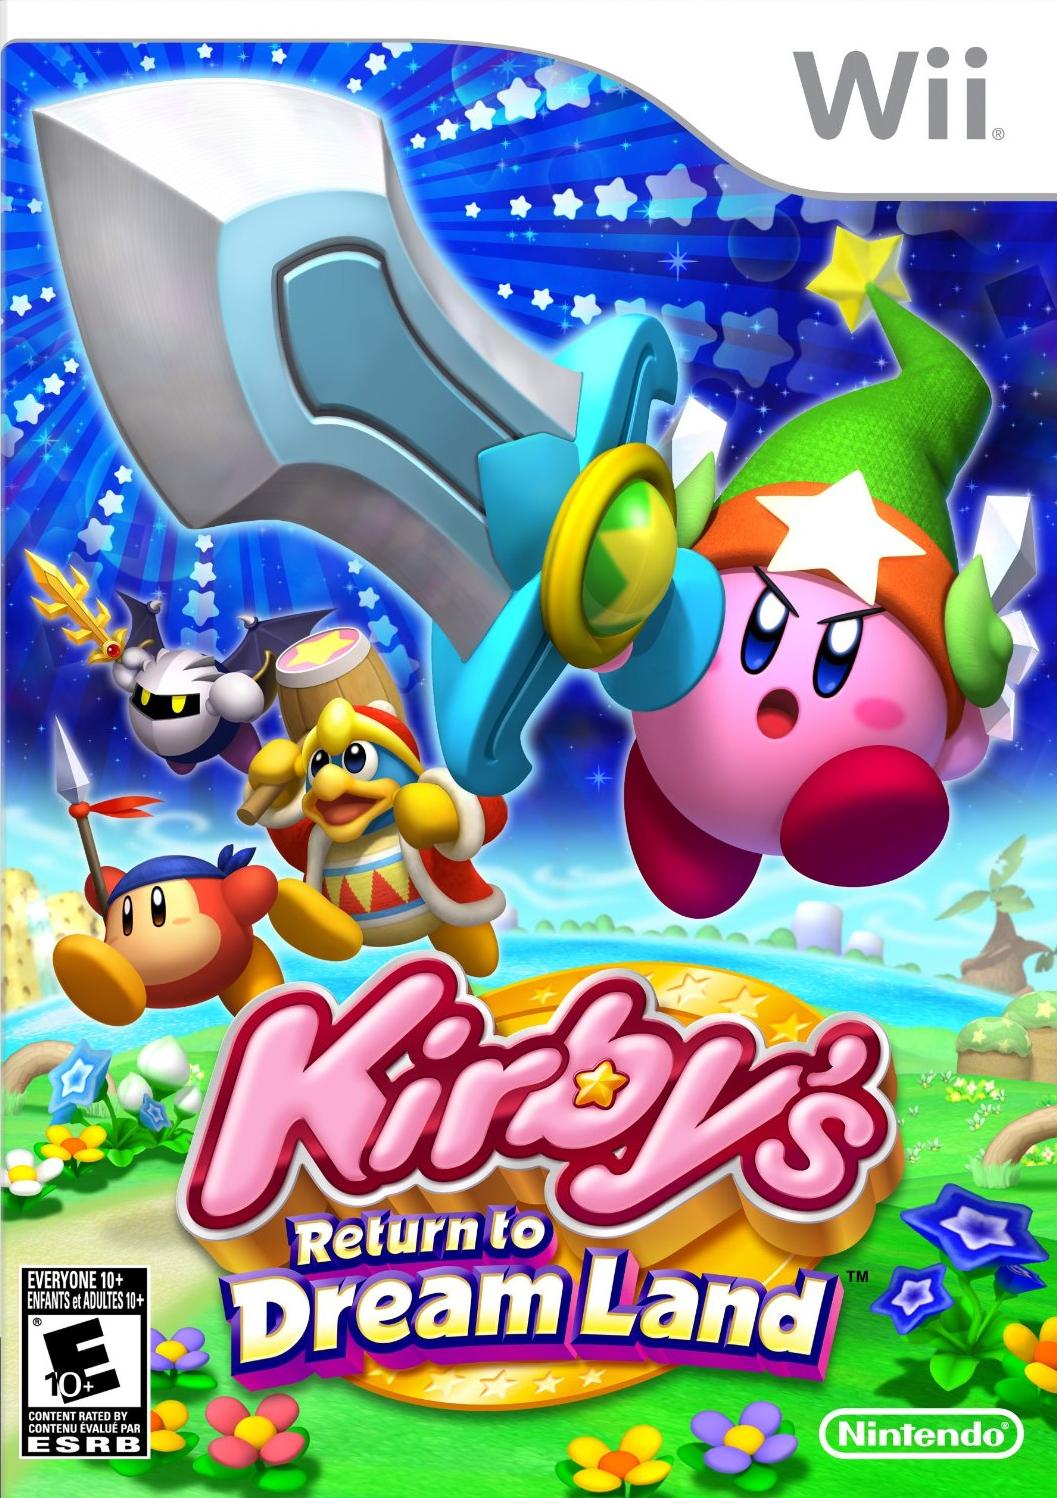 Kirby and the Forgotten Land Review for Nintendo Switch: - GameFAQs